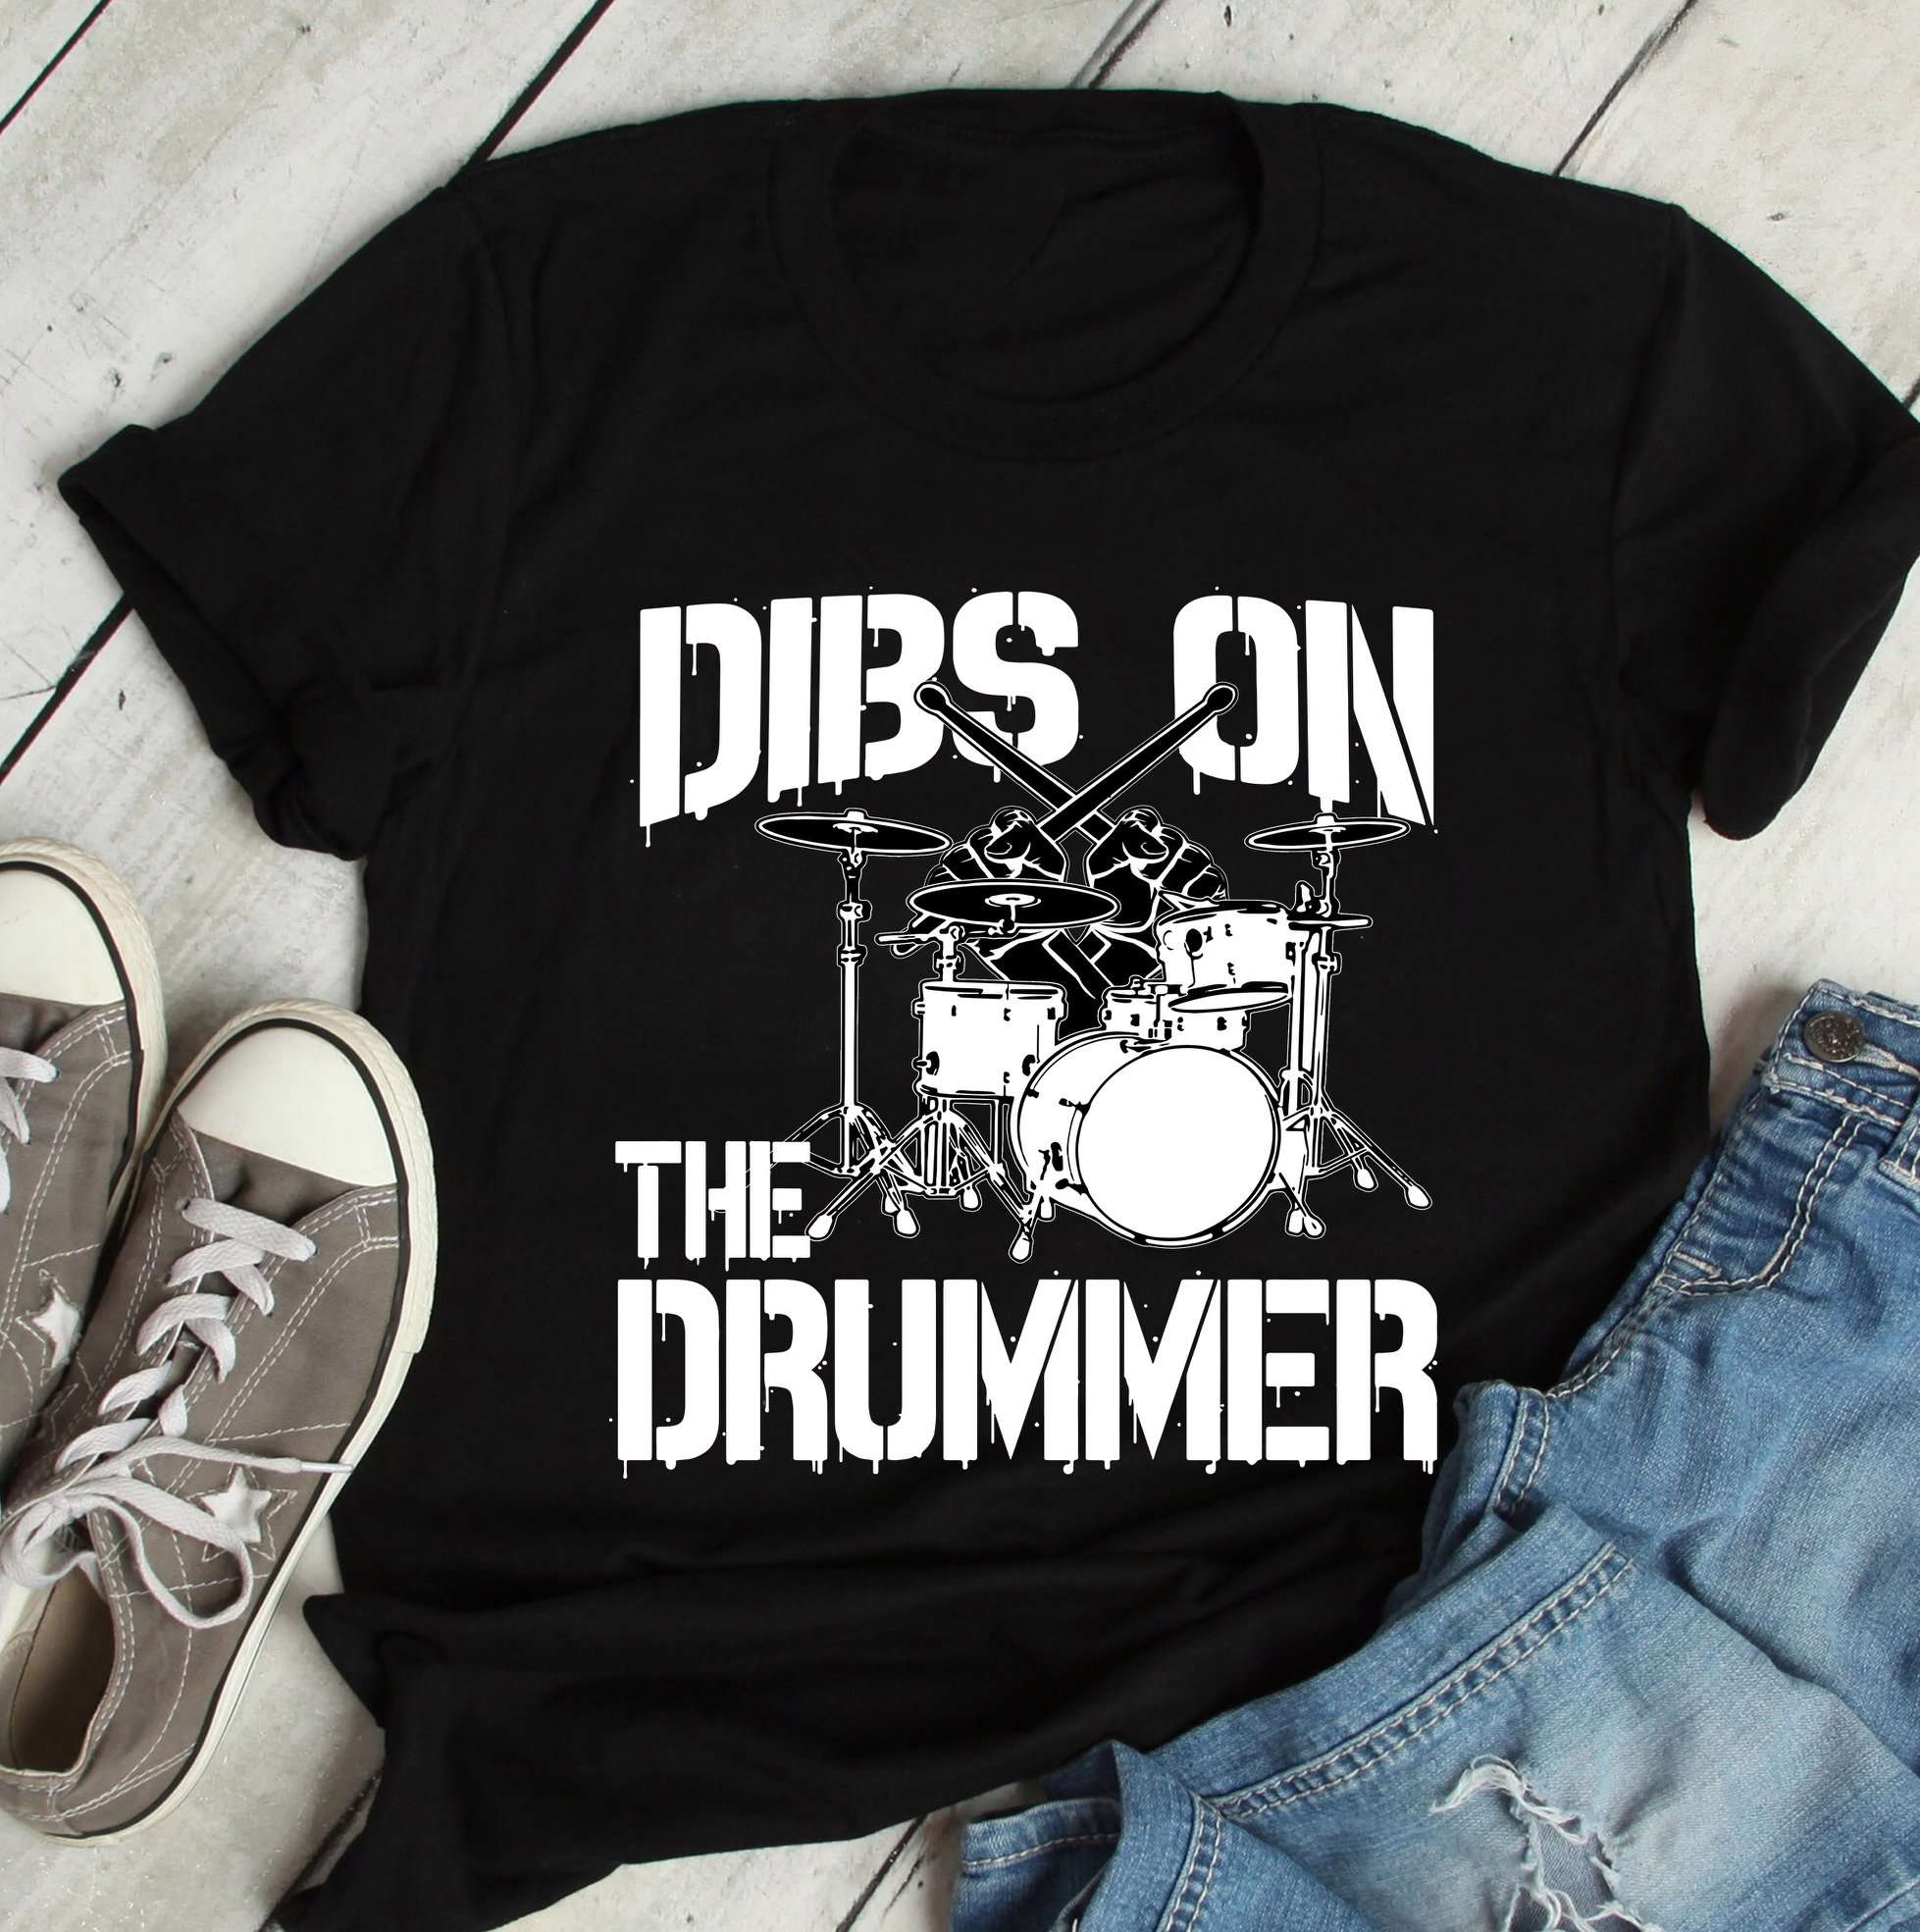 Dibs on the drummer - Passionate drummer, T-shirt for drum player